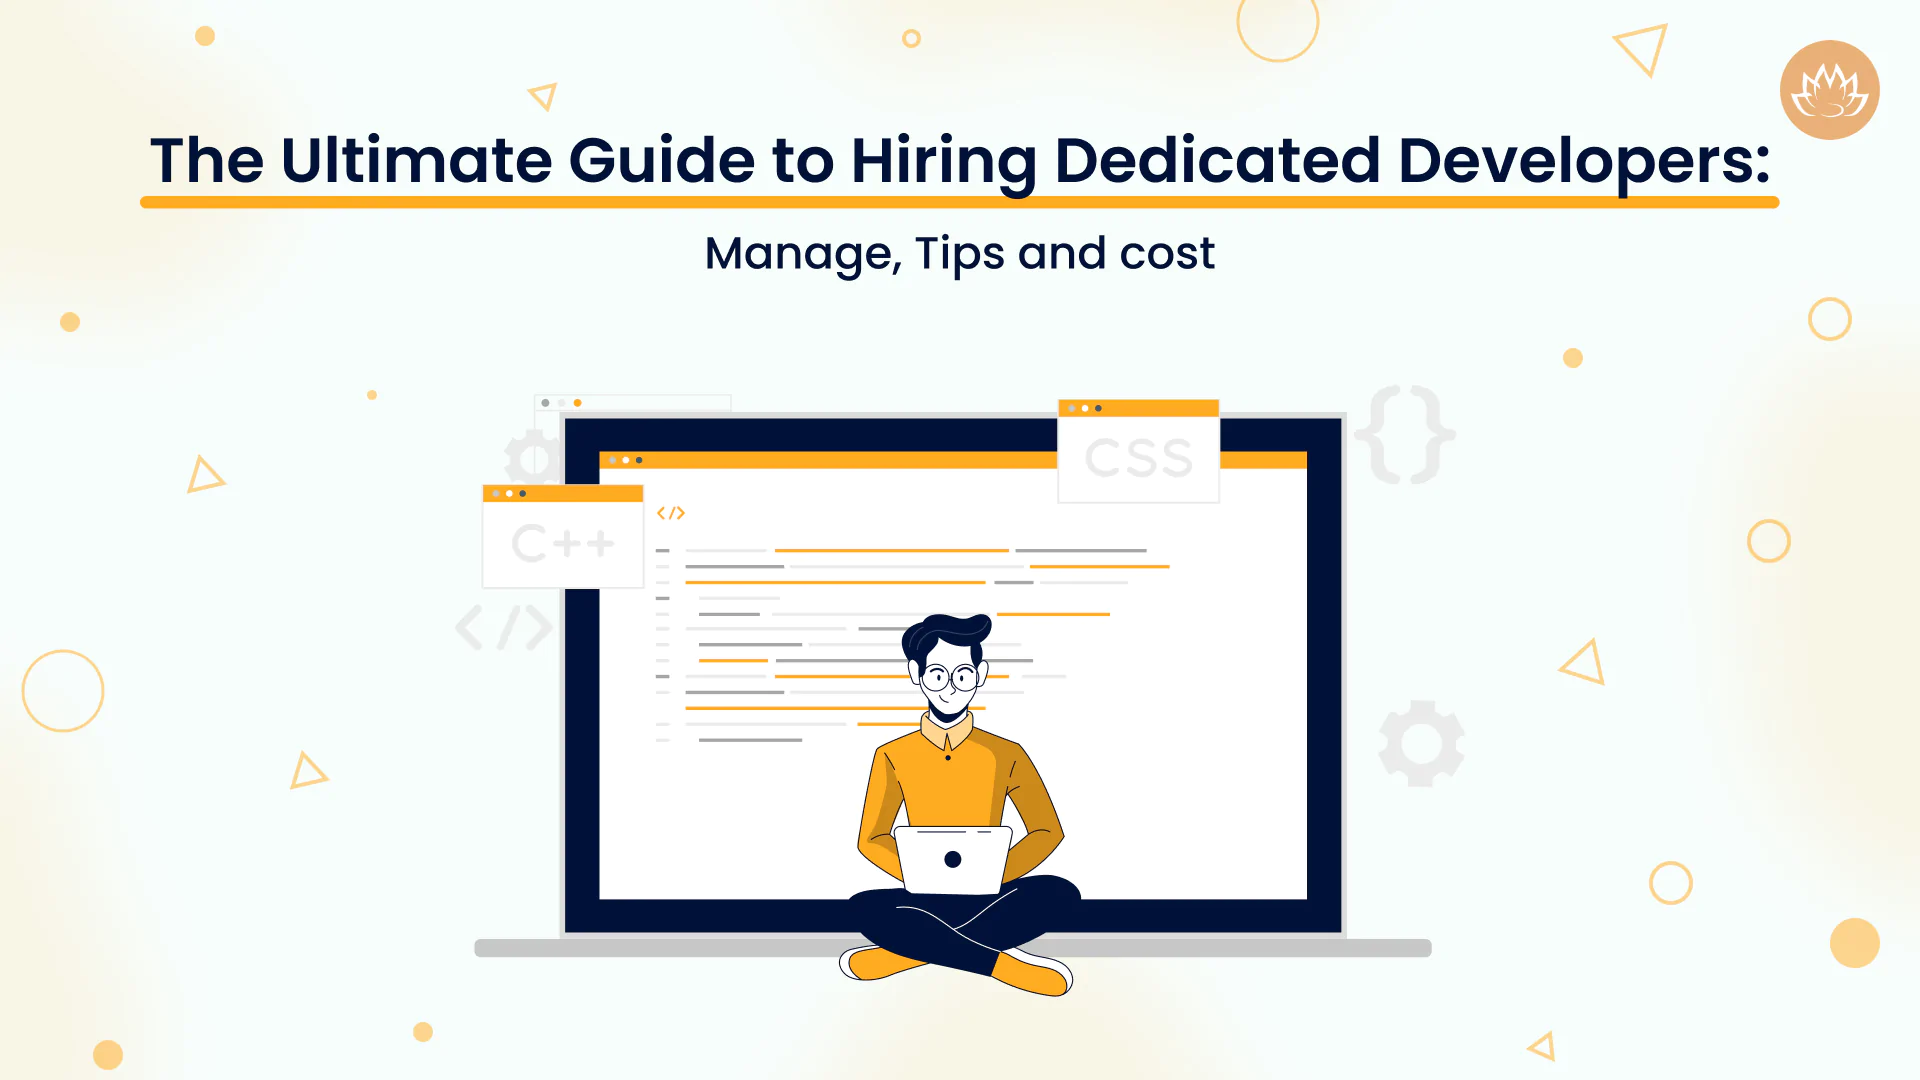 The Ultimate Guide to Hiring Dedicated Developers_ Manage, Tips and cost